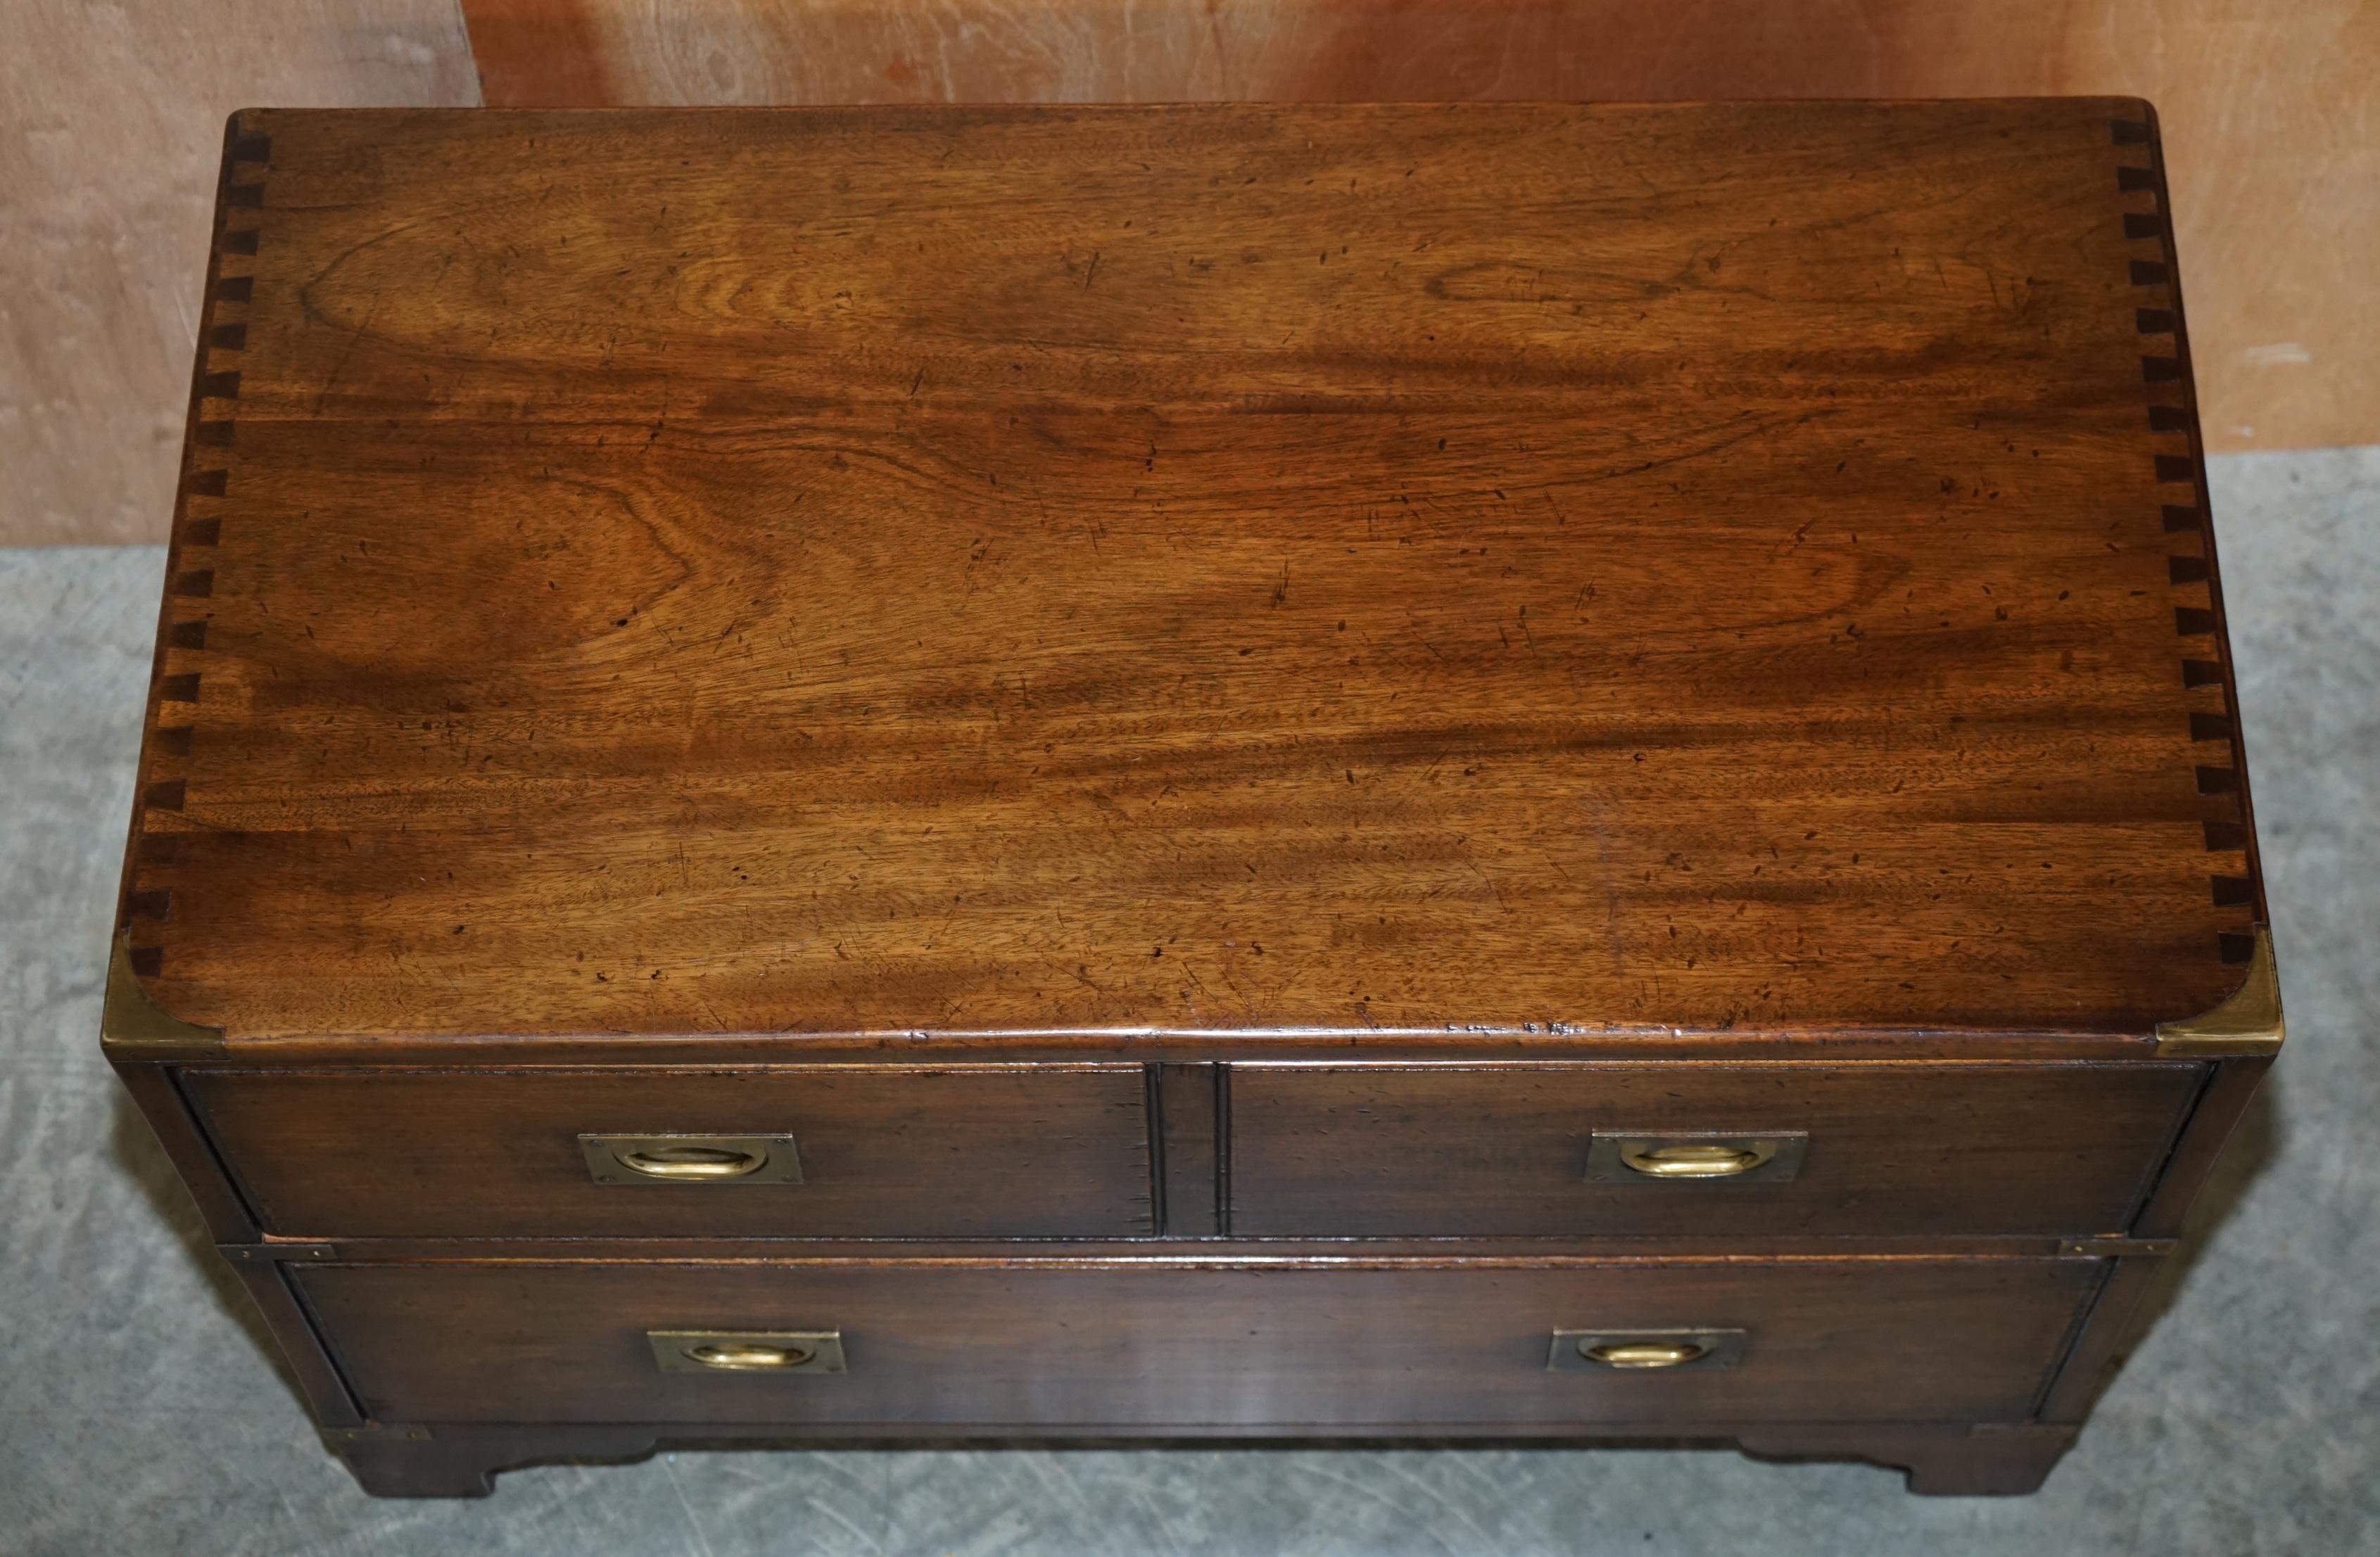 Hand-Crafted Hardwood Harrods London Kennedy Military Campaign Chest of Drawers Tv Stand